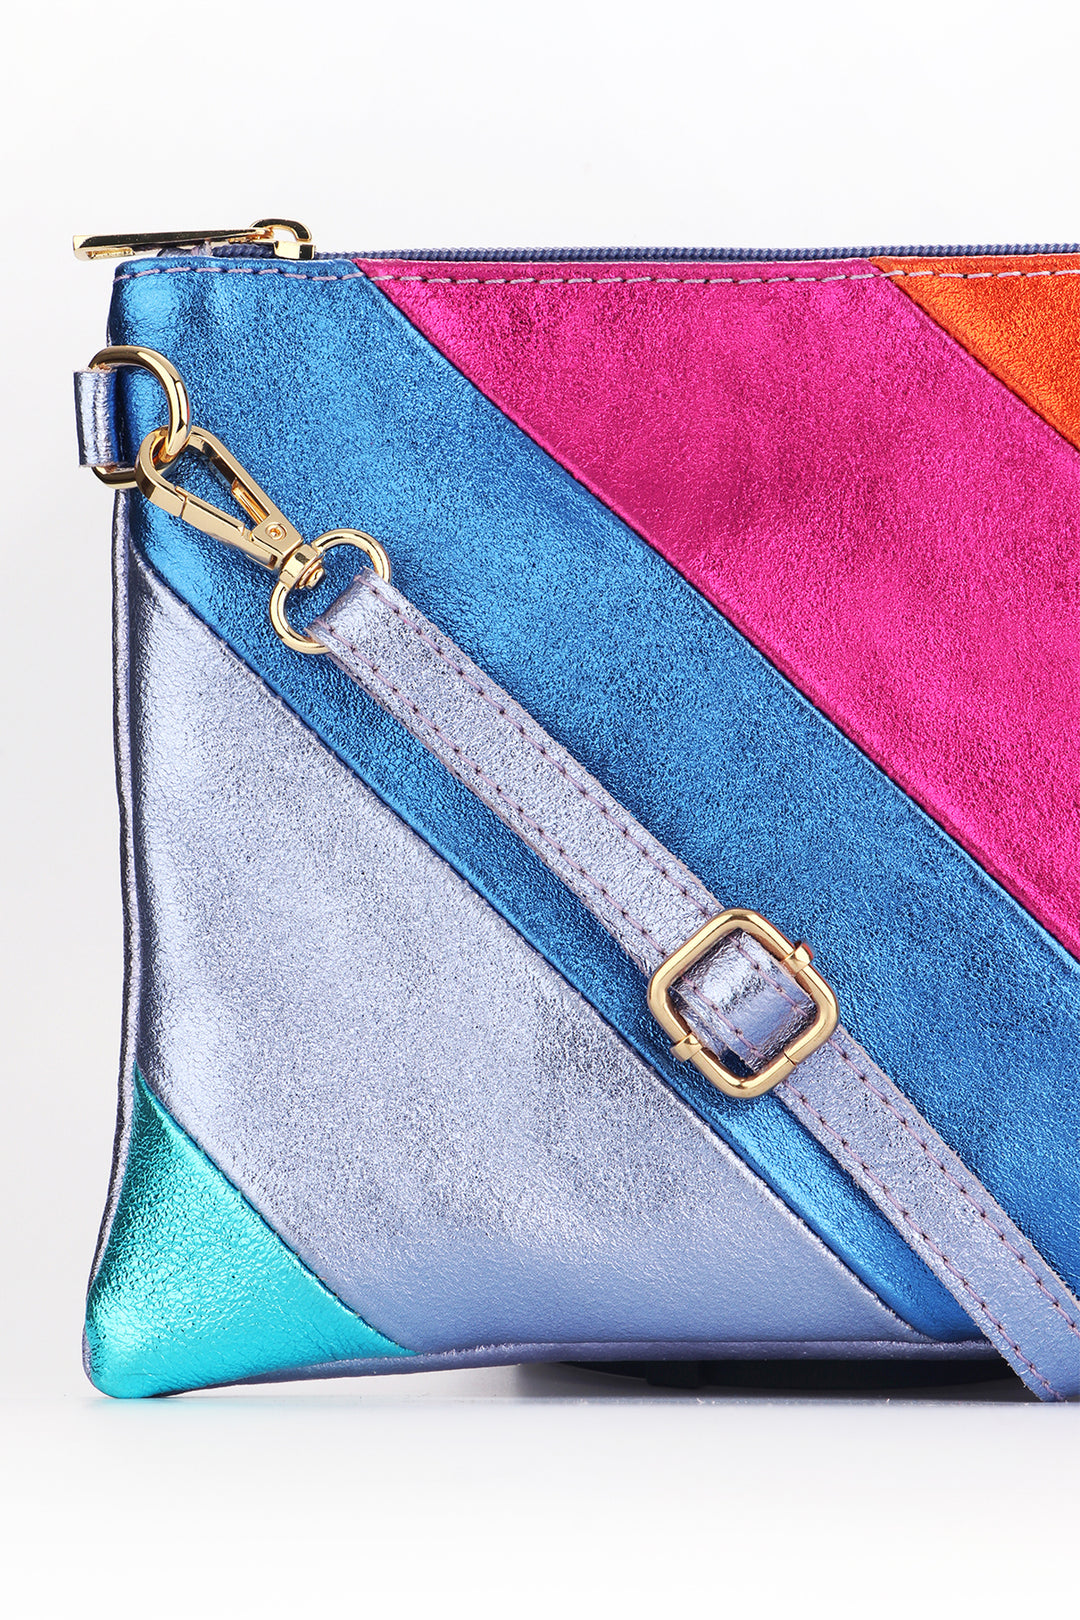 close up of the multicoloured rainbow stripe pattern on the wristlet clutch bag